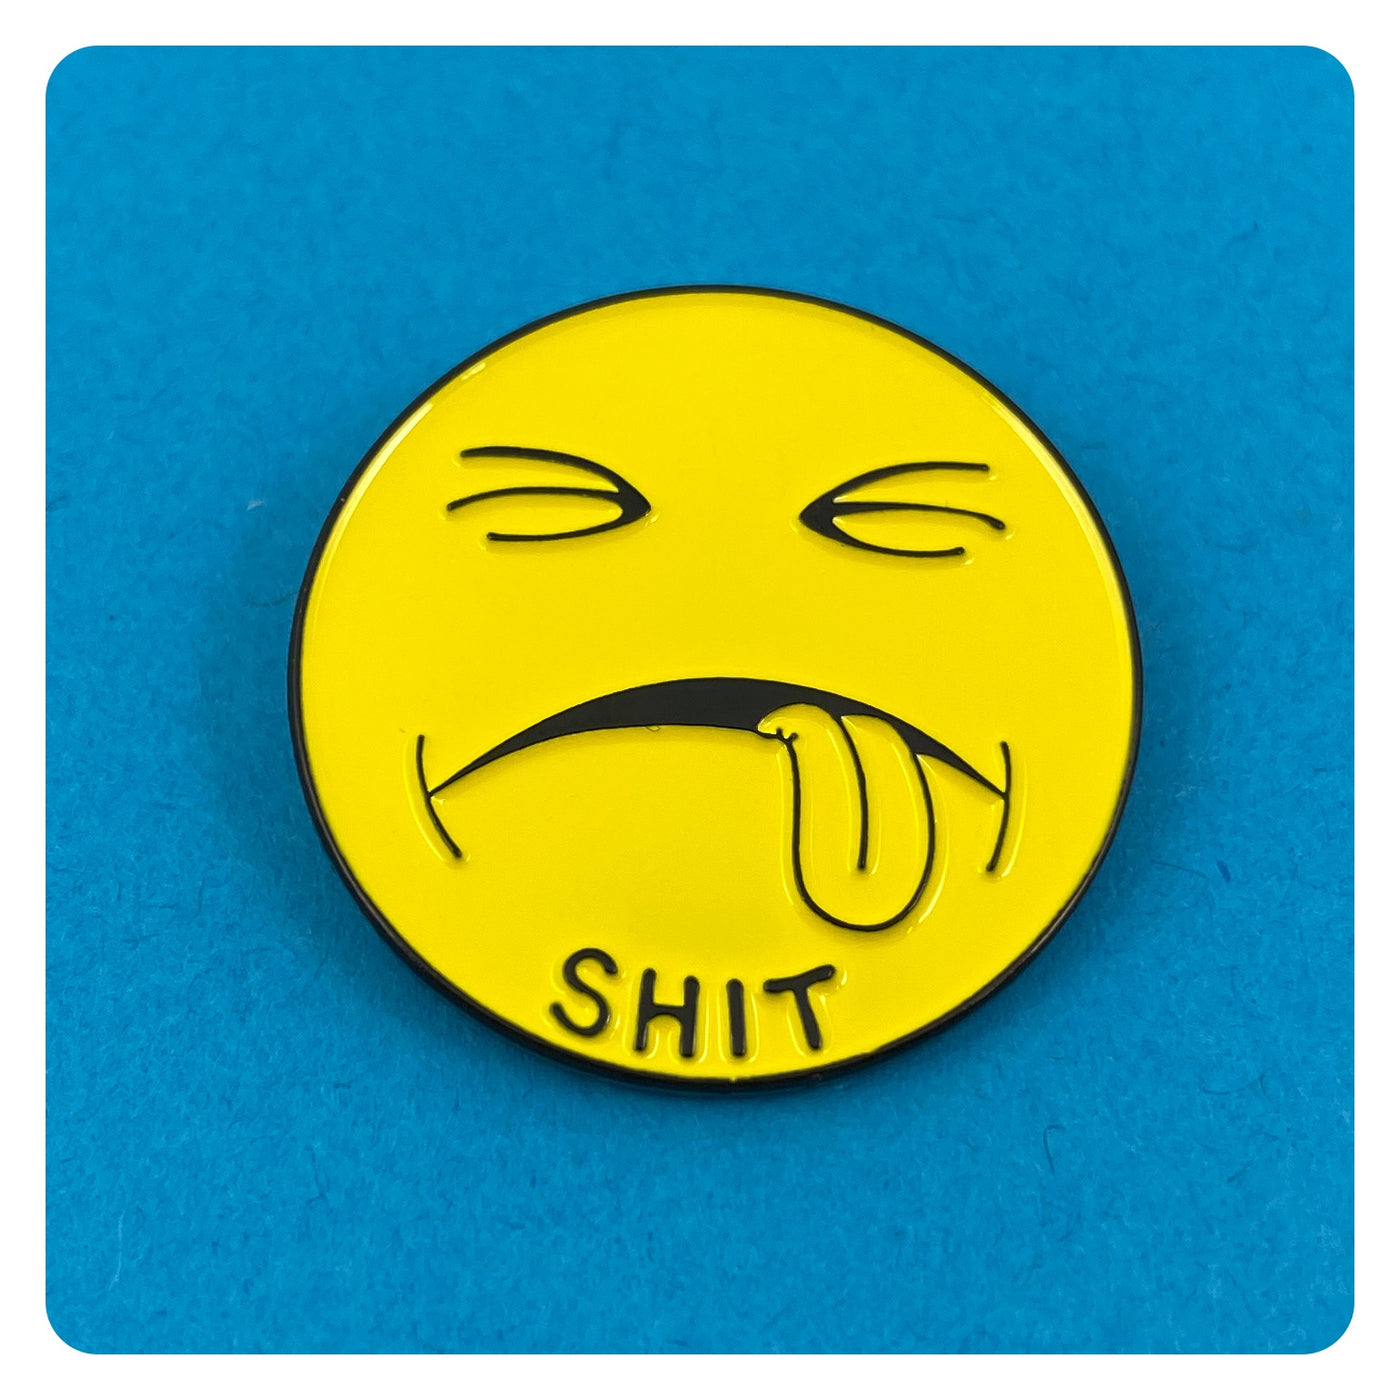 Have a Crappy Day Enamel Pin